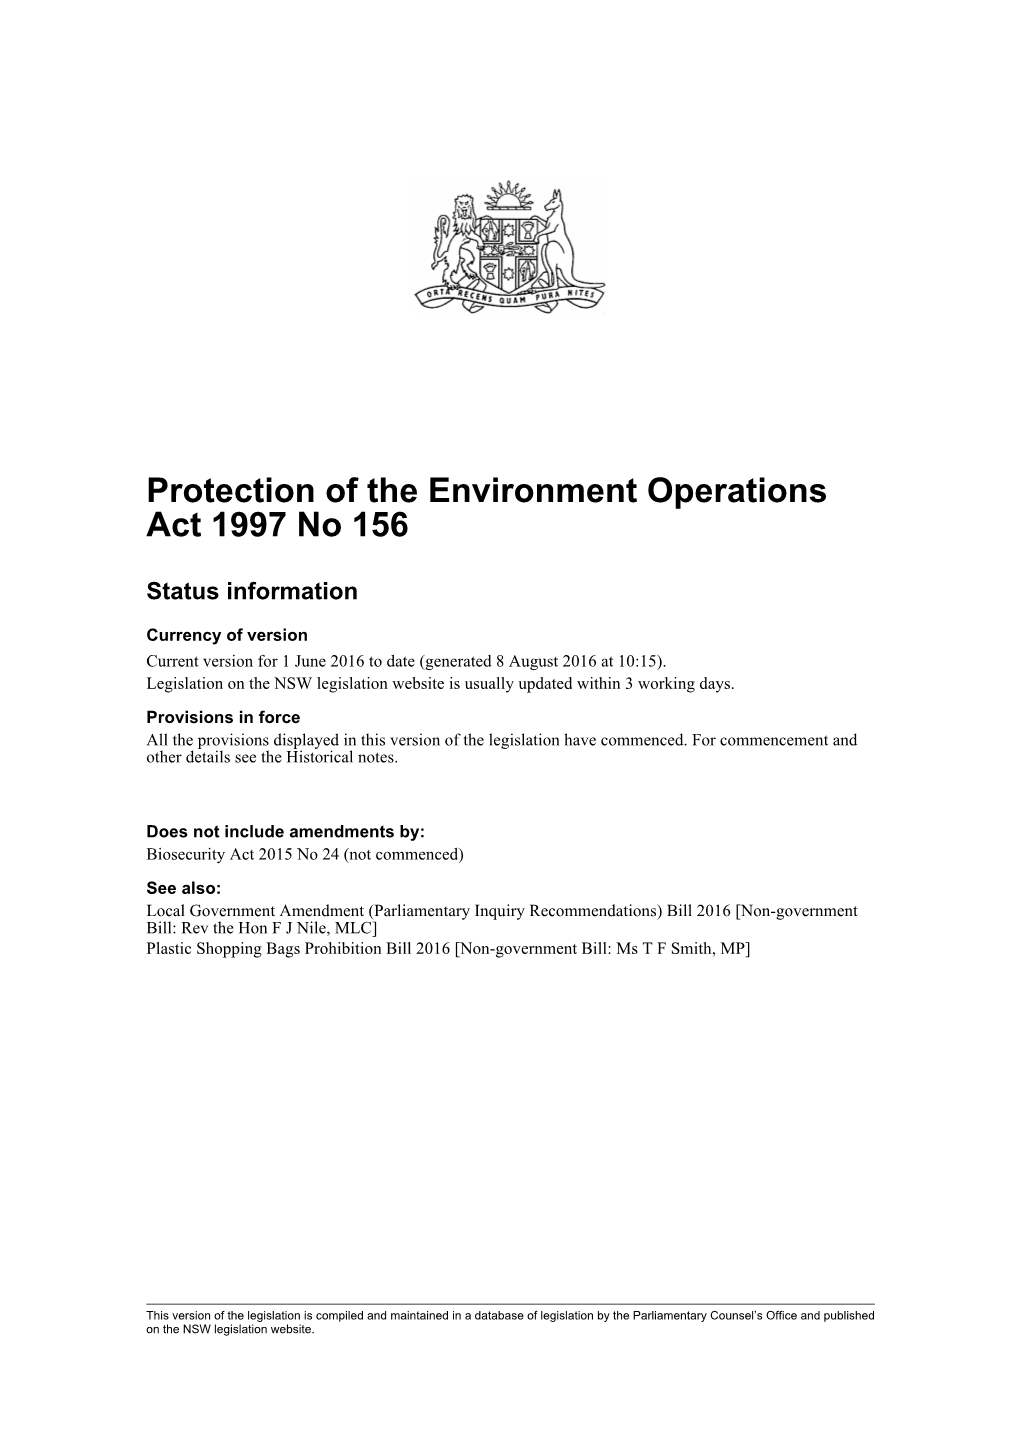 Protection of the Environment Operations Act 1997 No 156